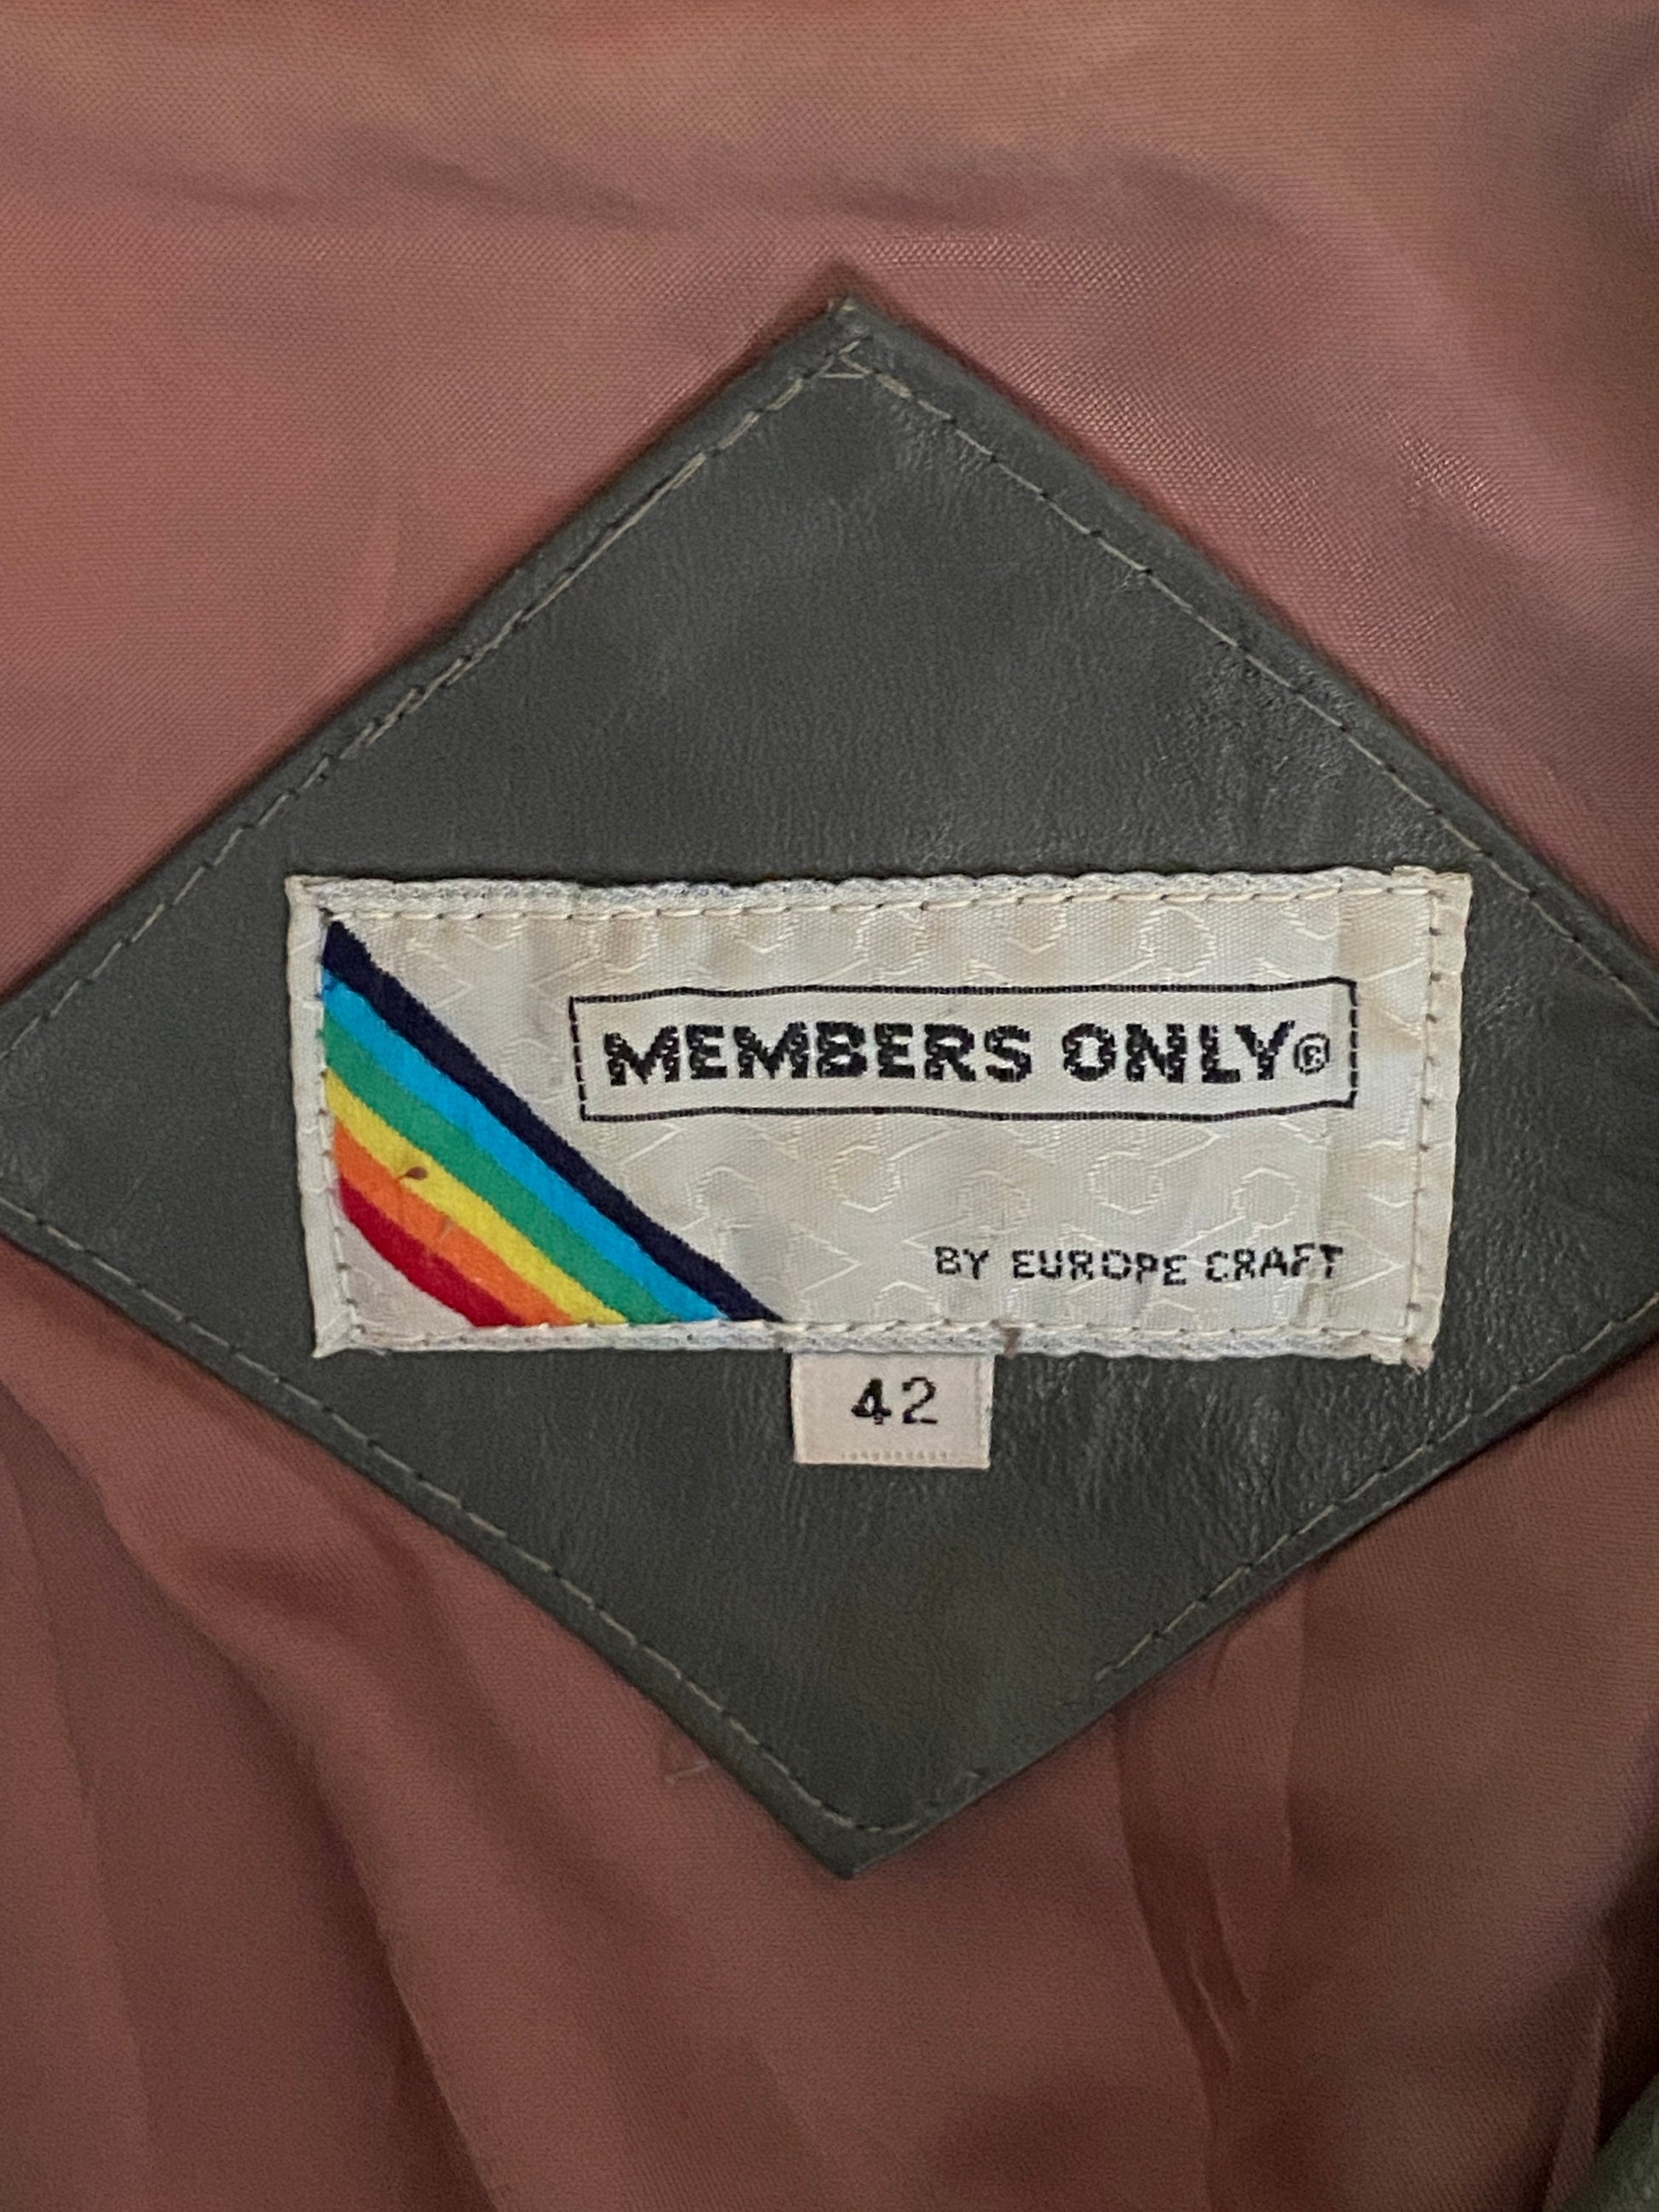 Vintage Grey Leather Members Only Jacket - Size 42 US / 52 EU